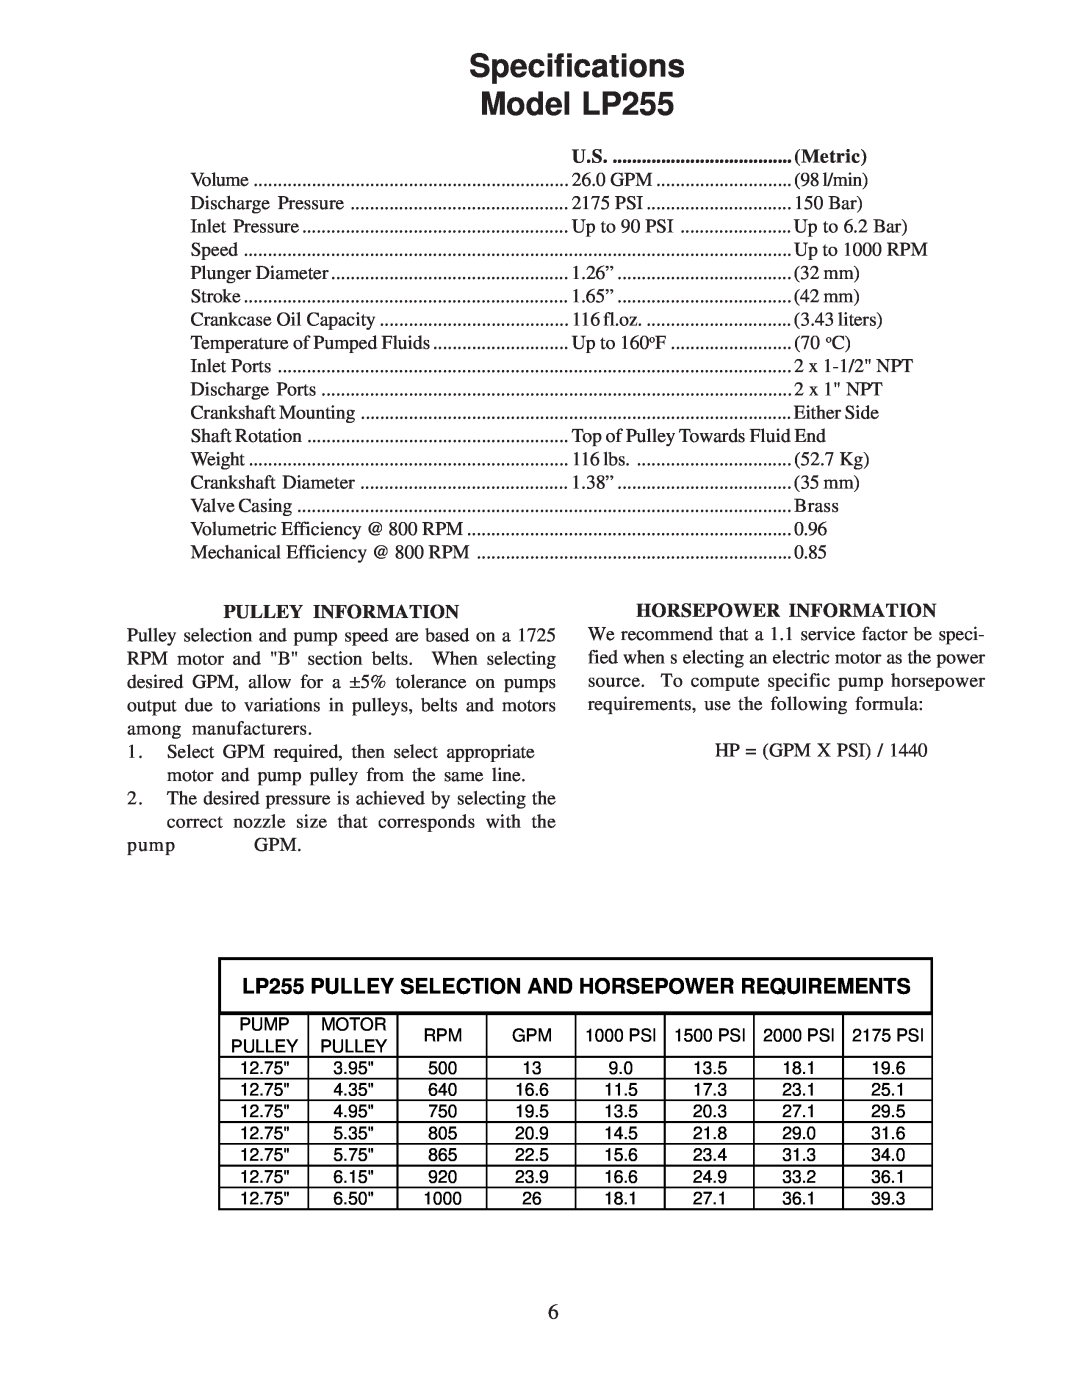 Giant LP122A operating instructions Specifications Model LP255, Metric, Pulley Information, Horsepower Information 